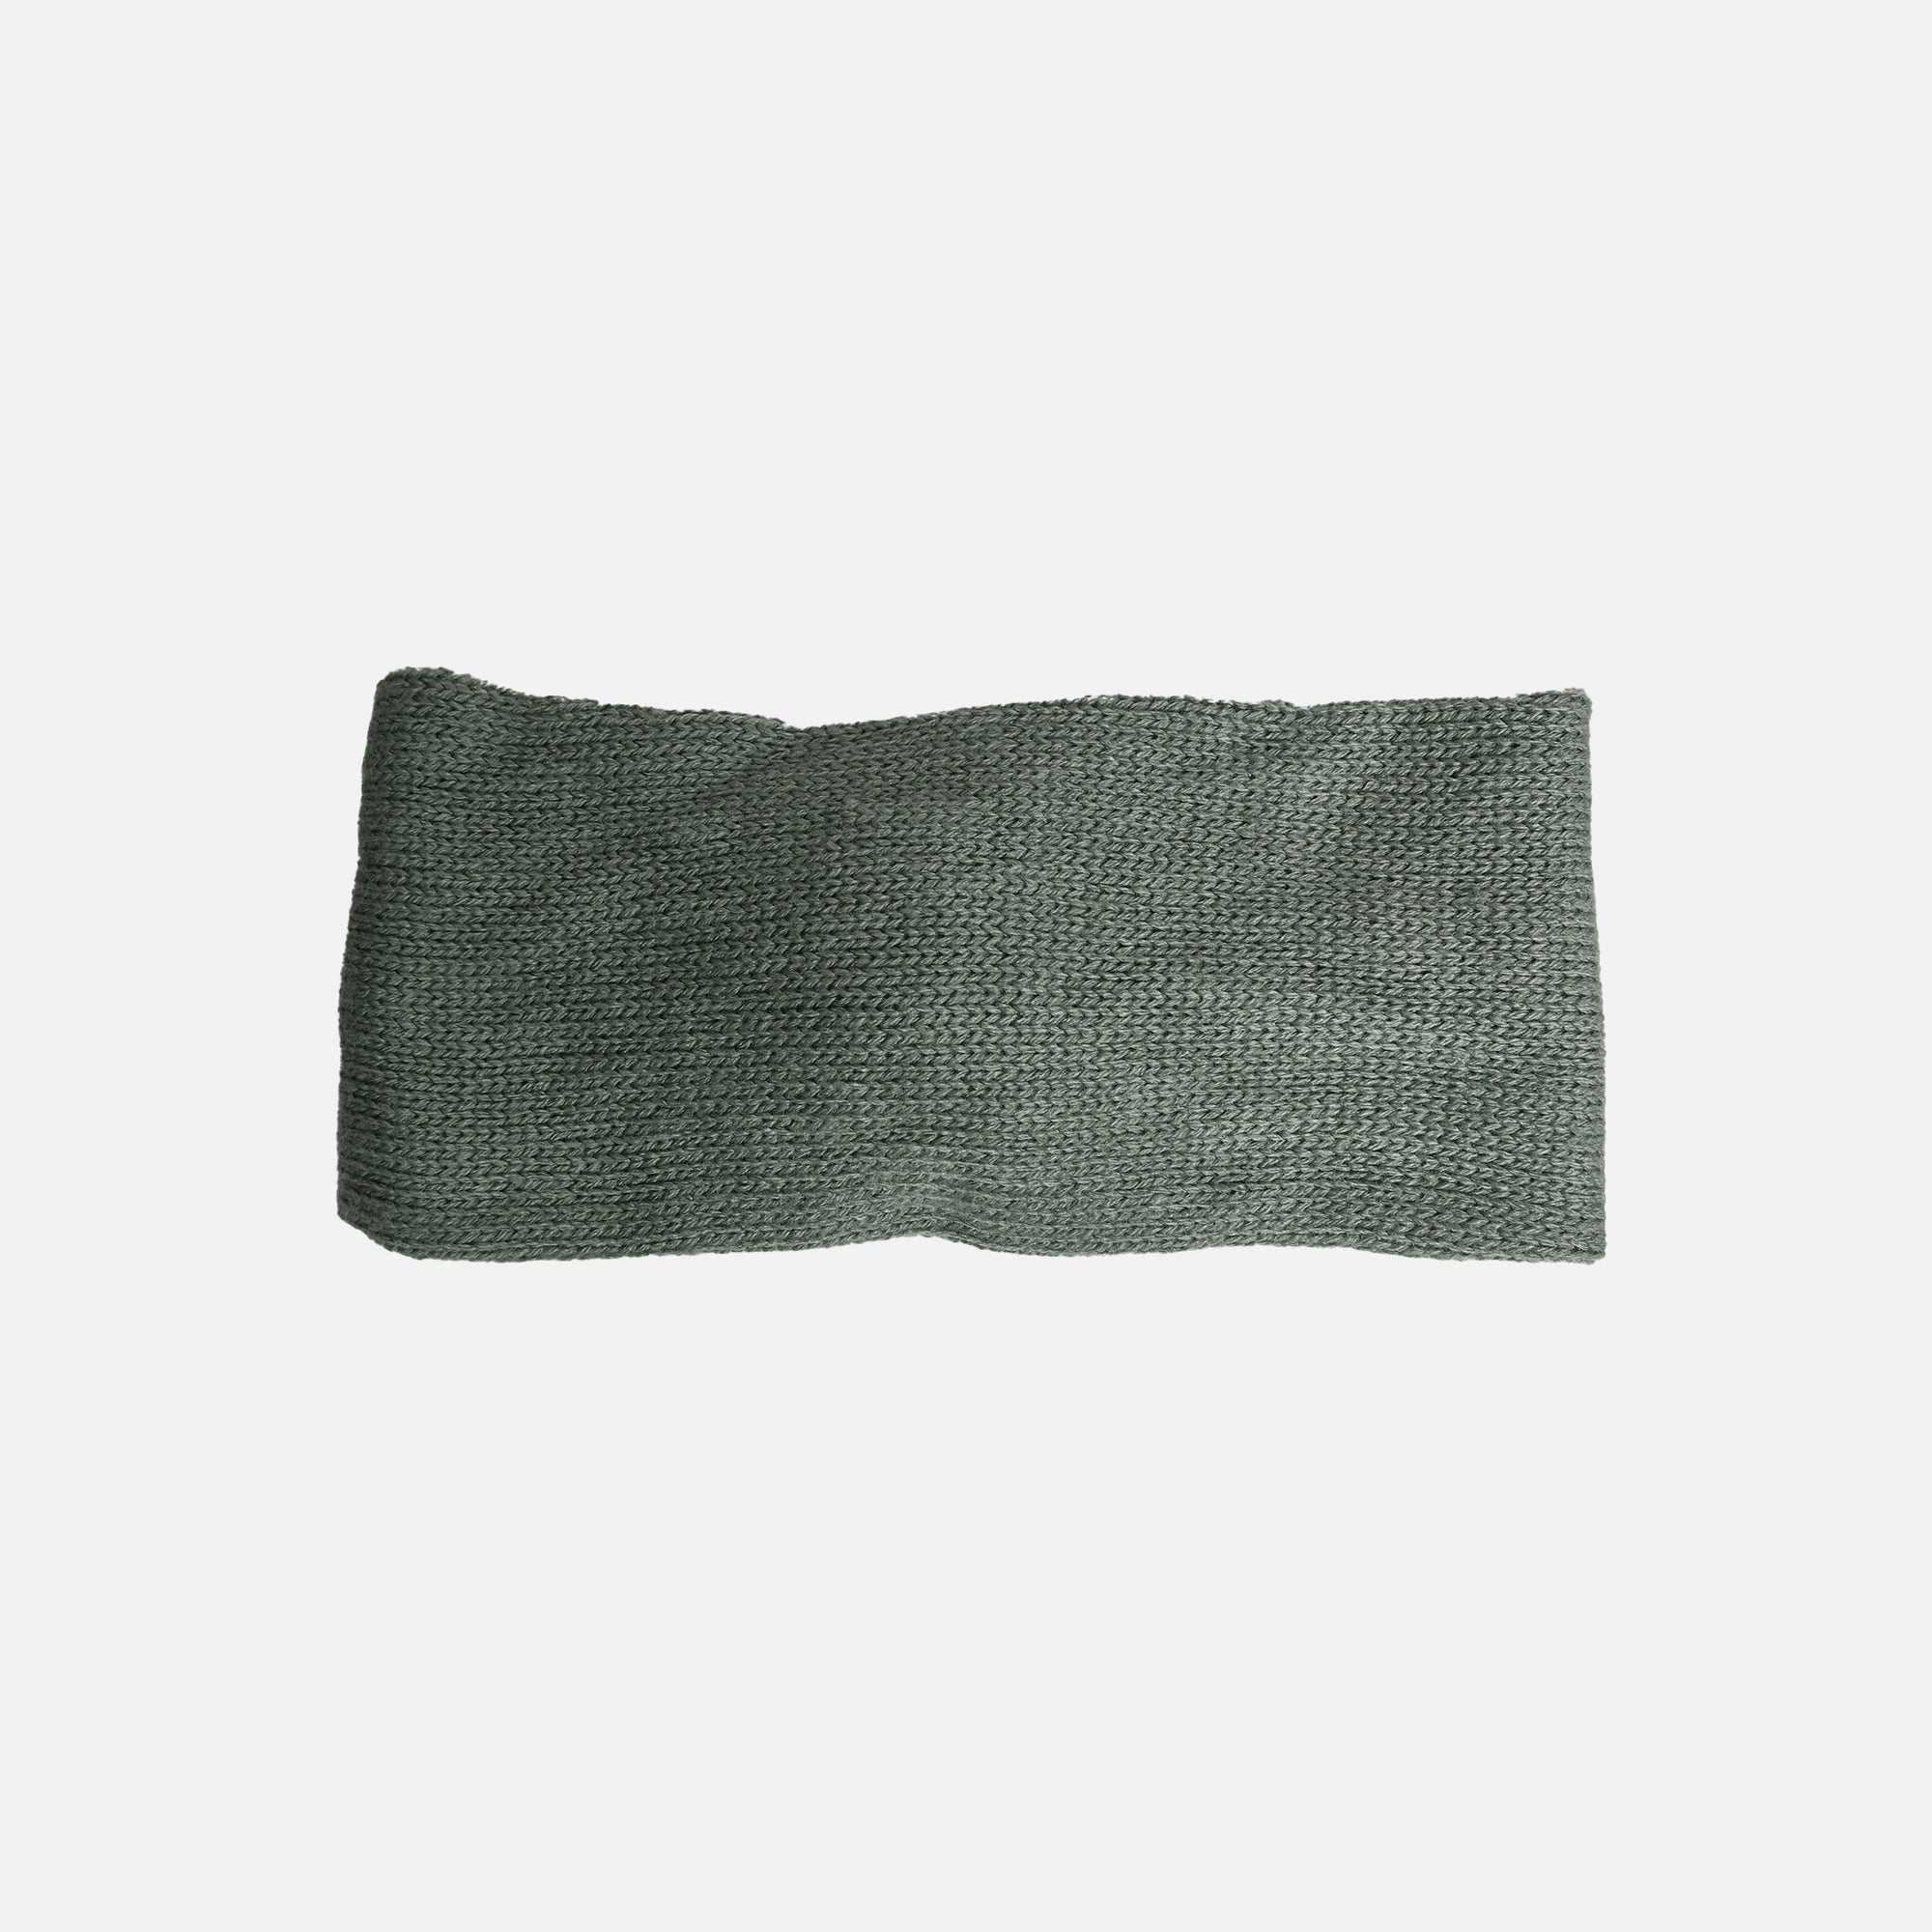 Green twisted knitted headband